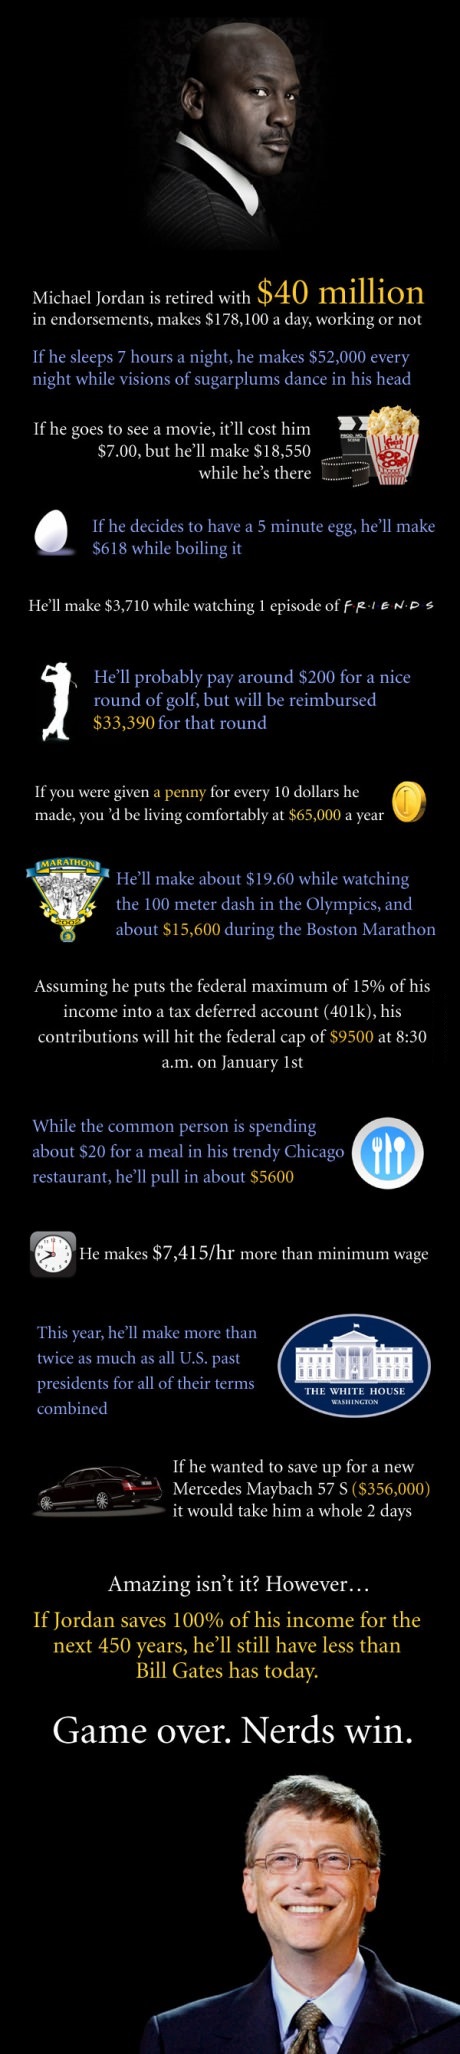 And if I save the 100% of my income for 450 years I will still had less than Michael Jordan has now